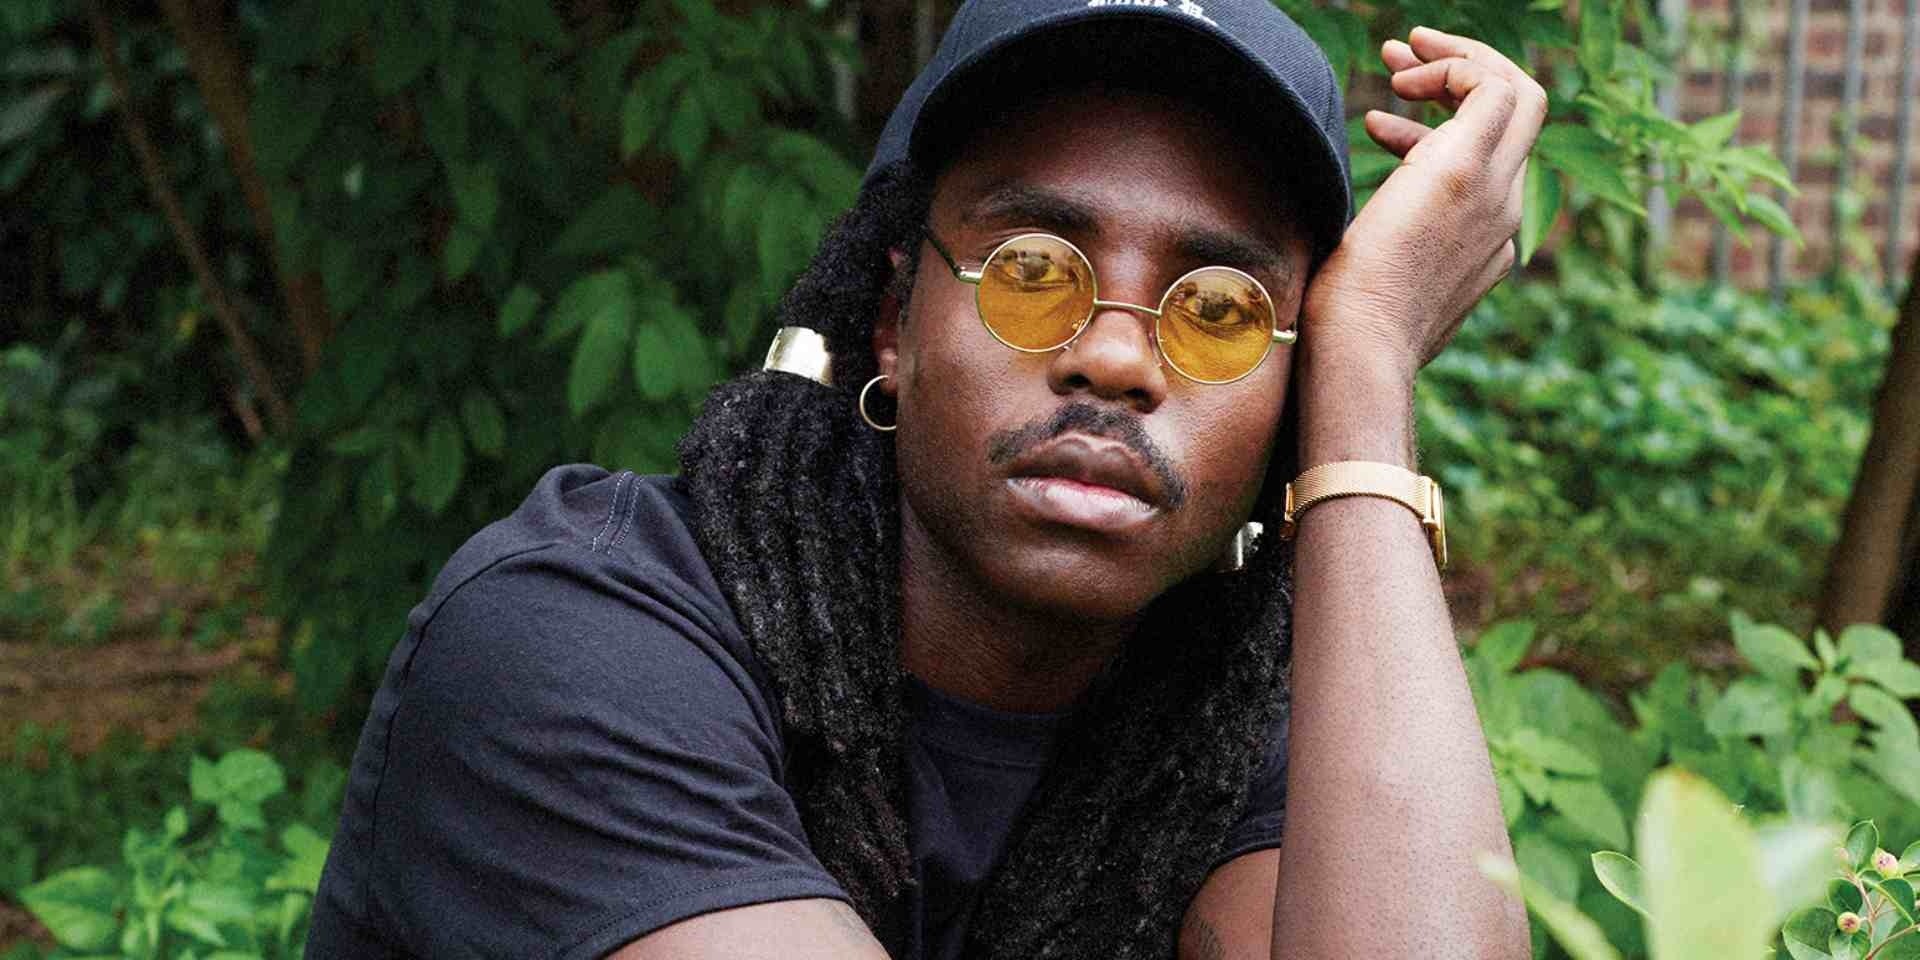 Blood Orange announces classical music album titled Fields, shares release date and cover art 